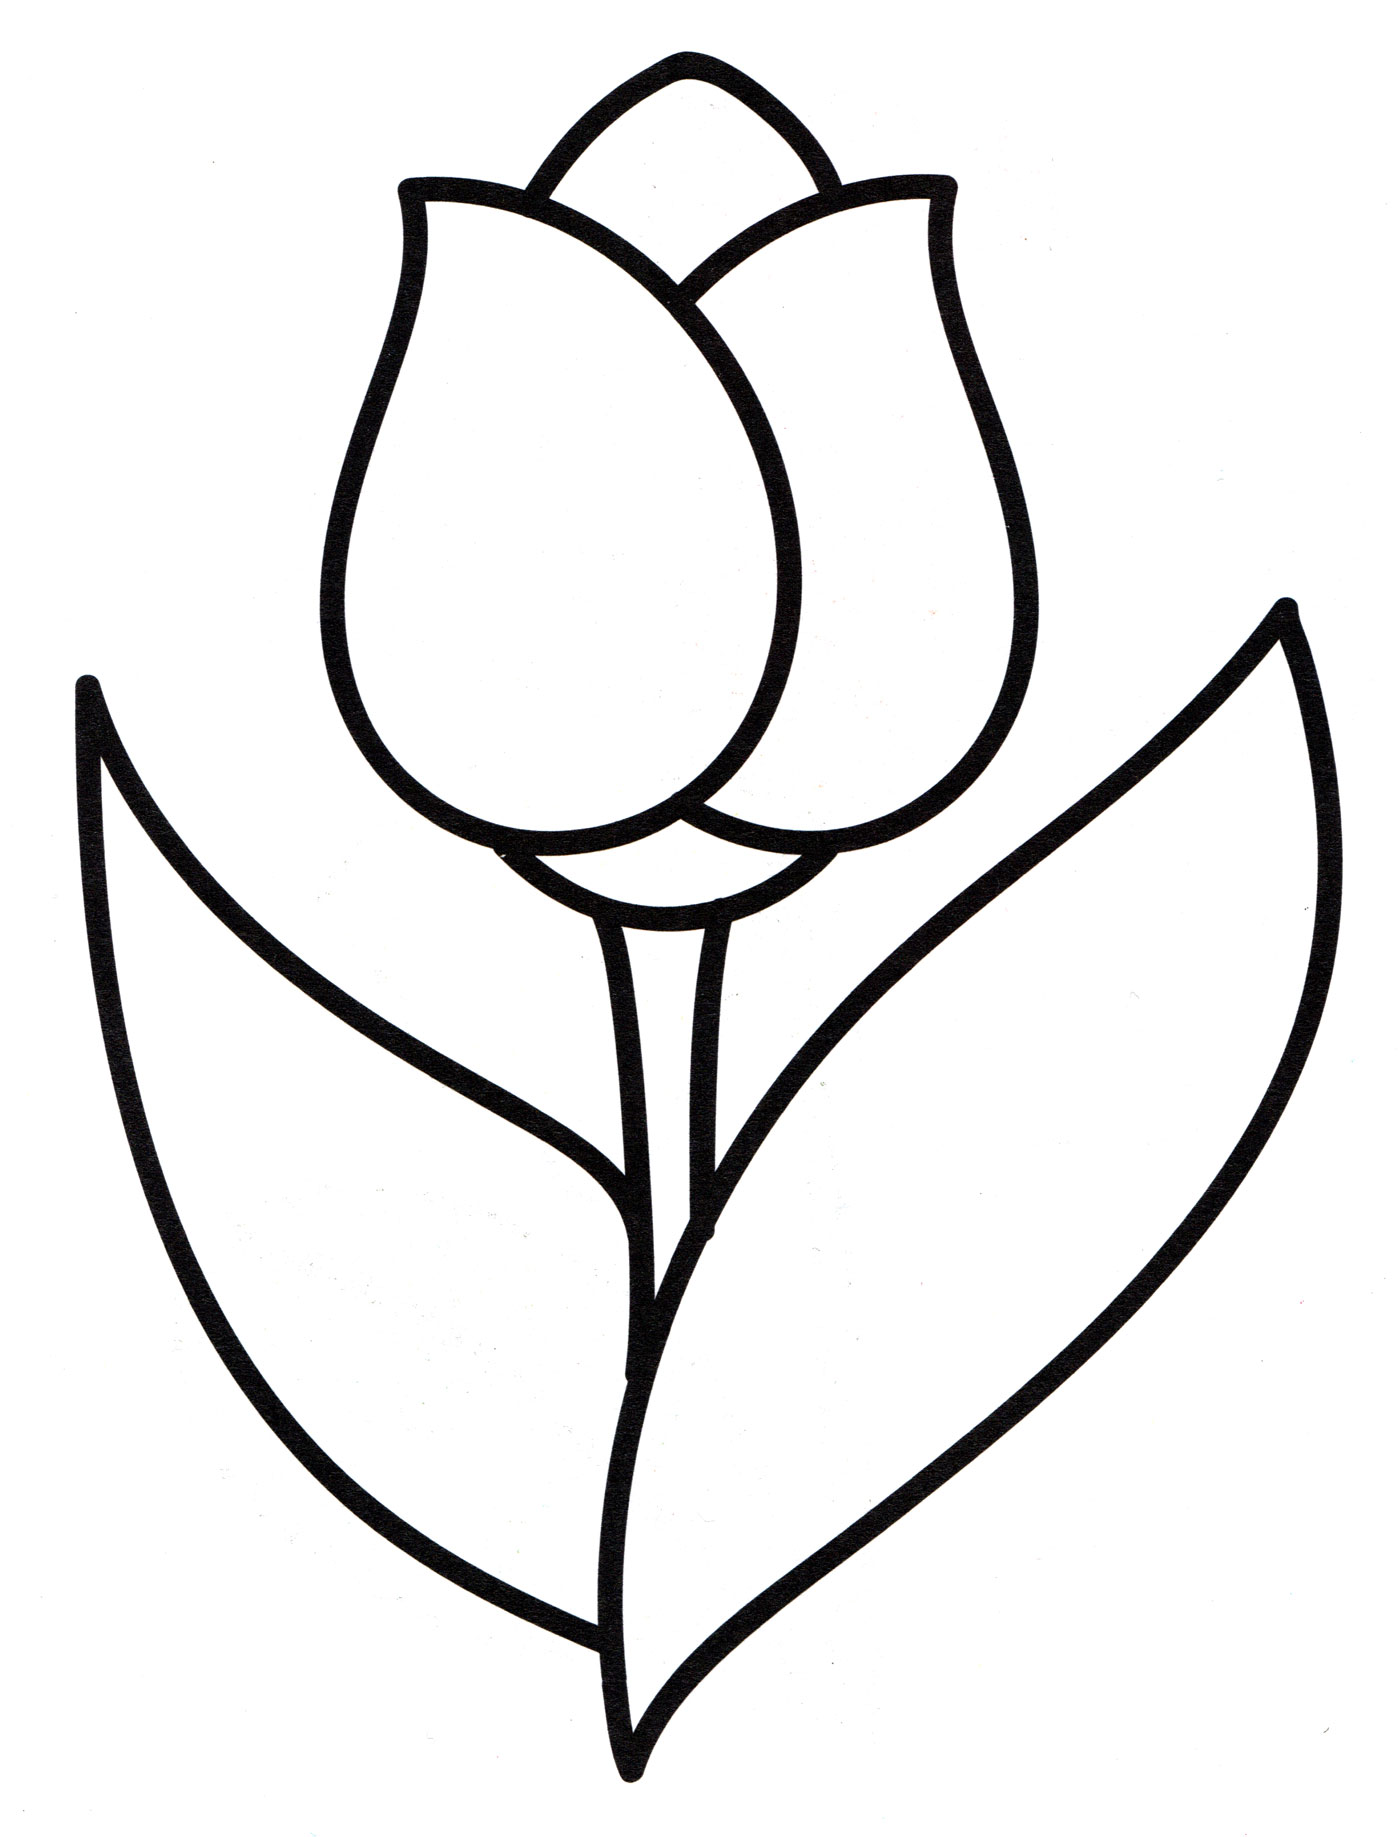 Coloring page Tulips Tulip for children